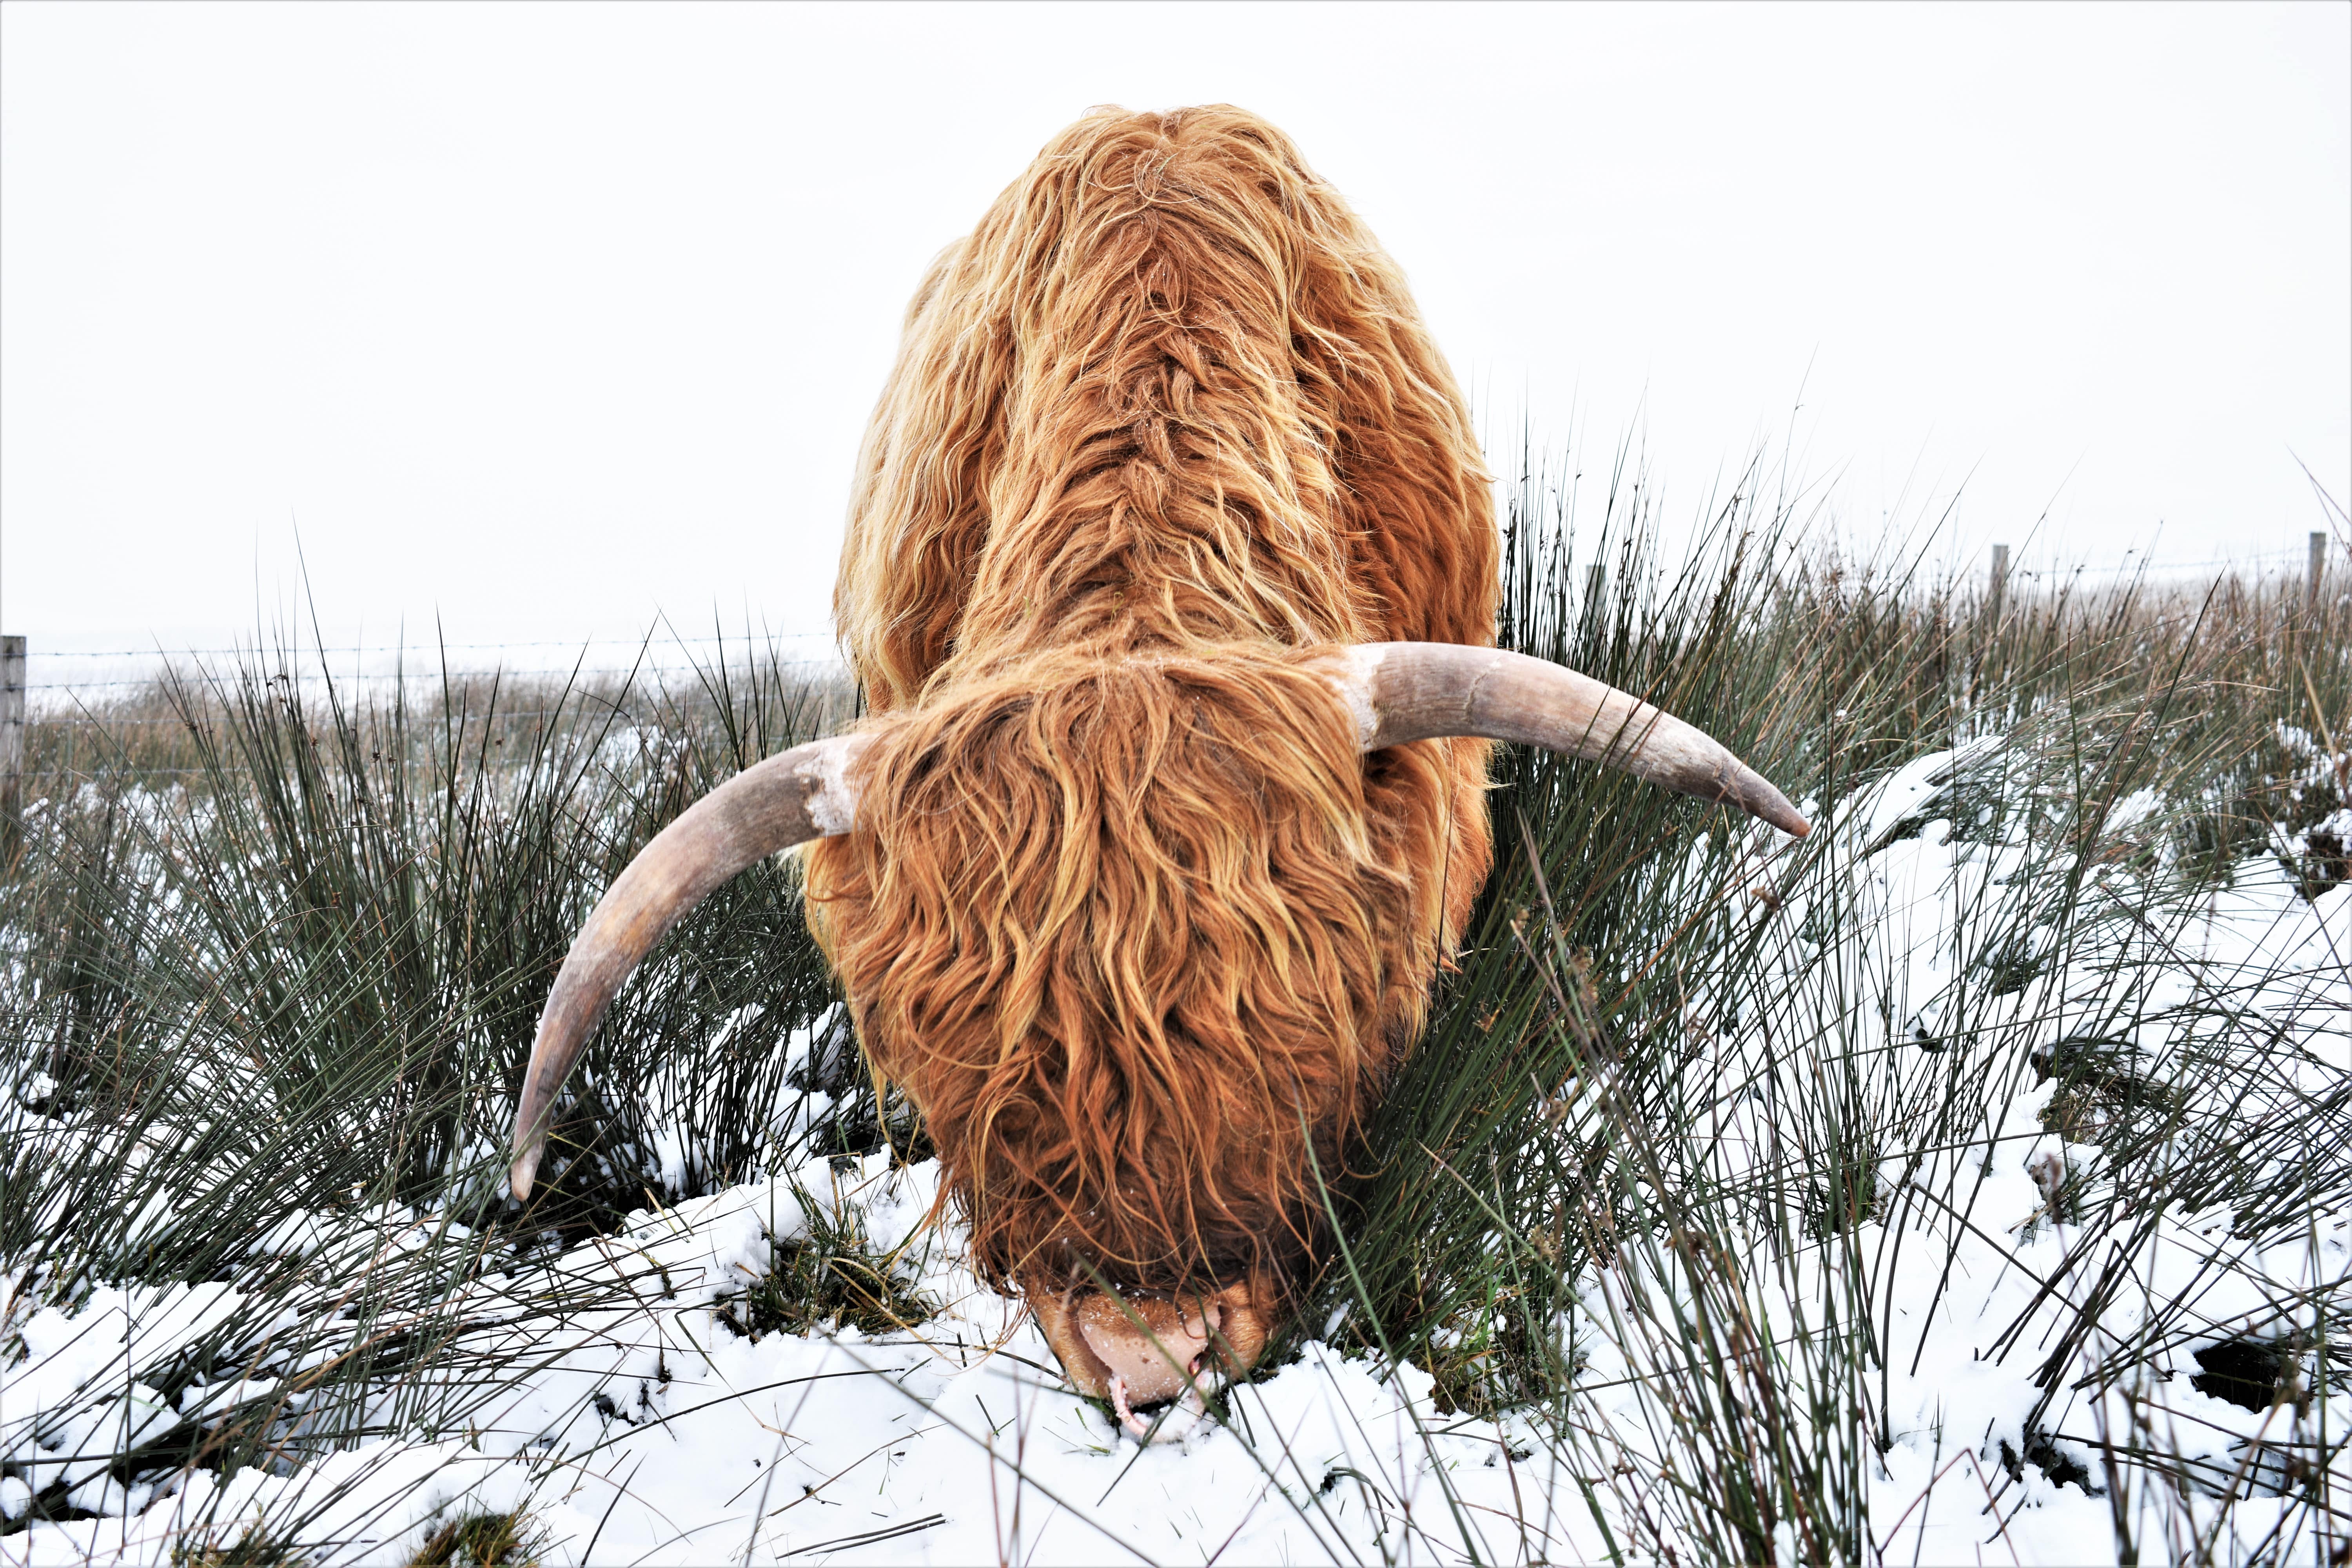 A Highland Cow enjoying the snow in Lyme Park, Cheshire